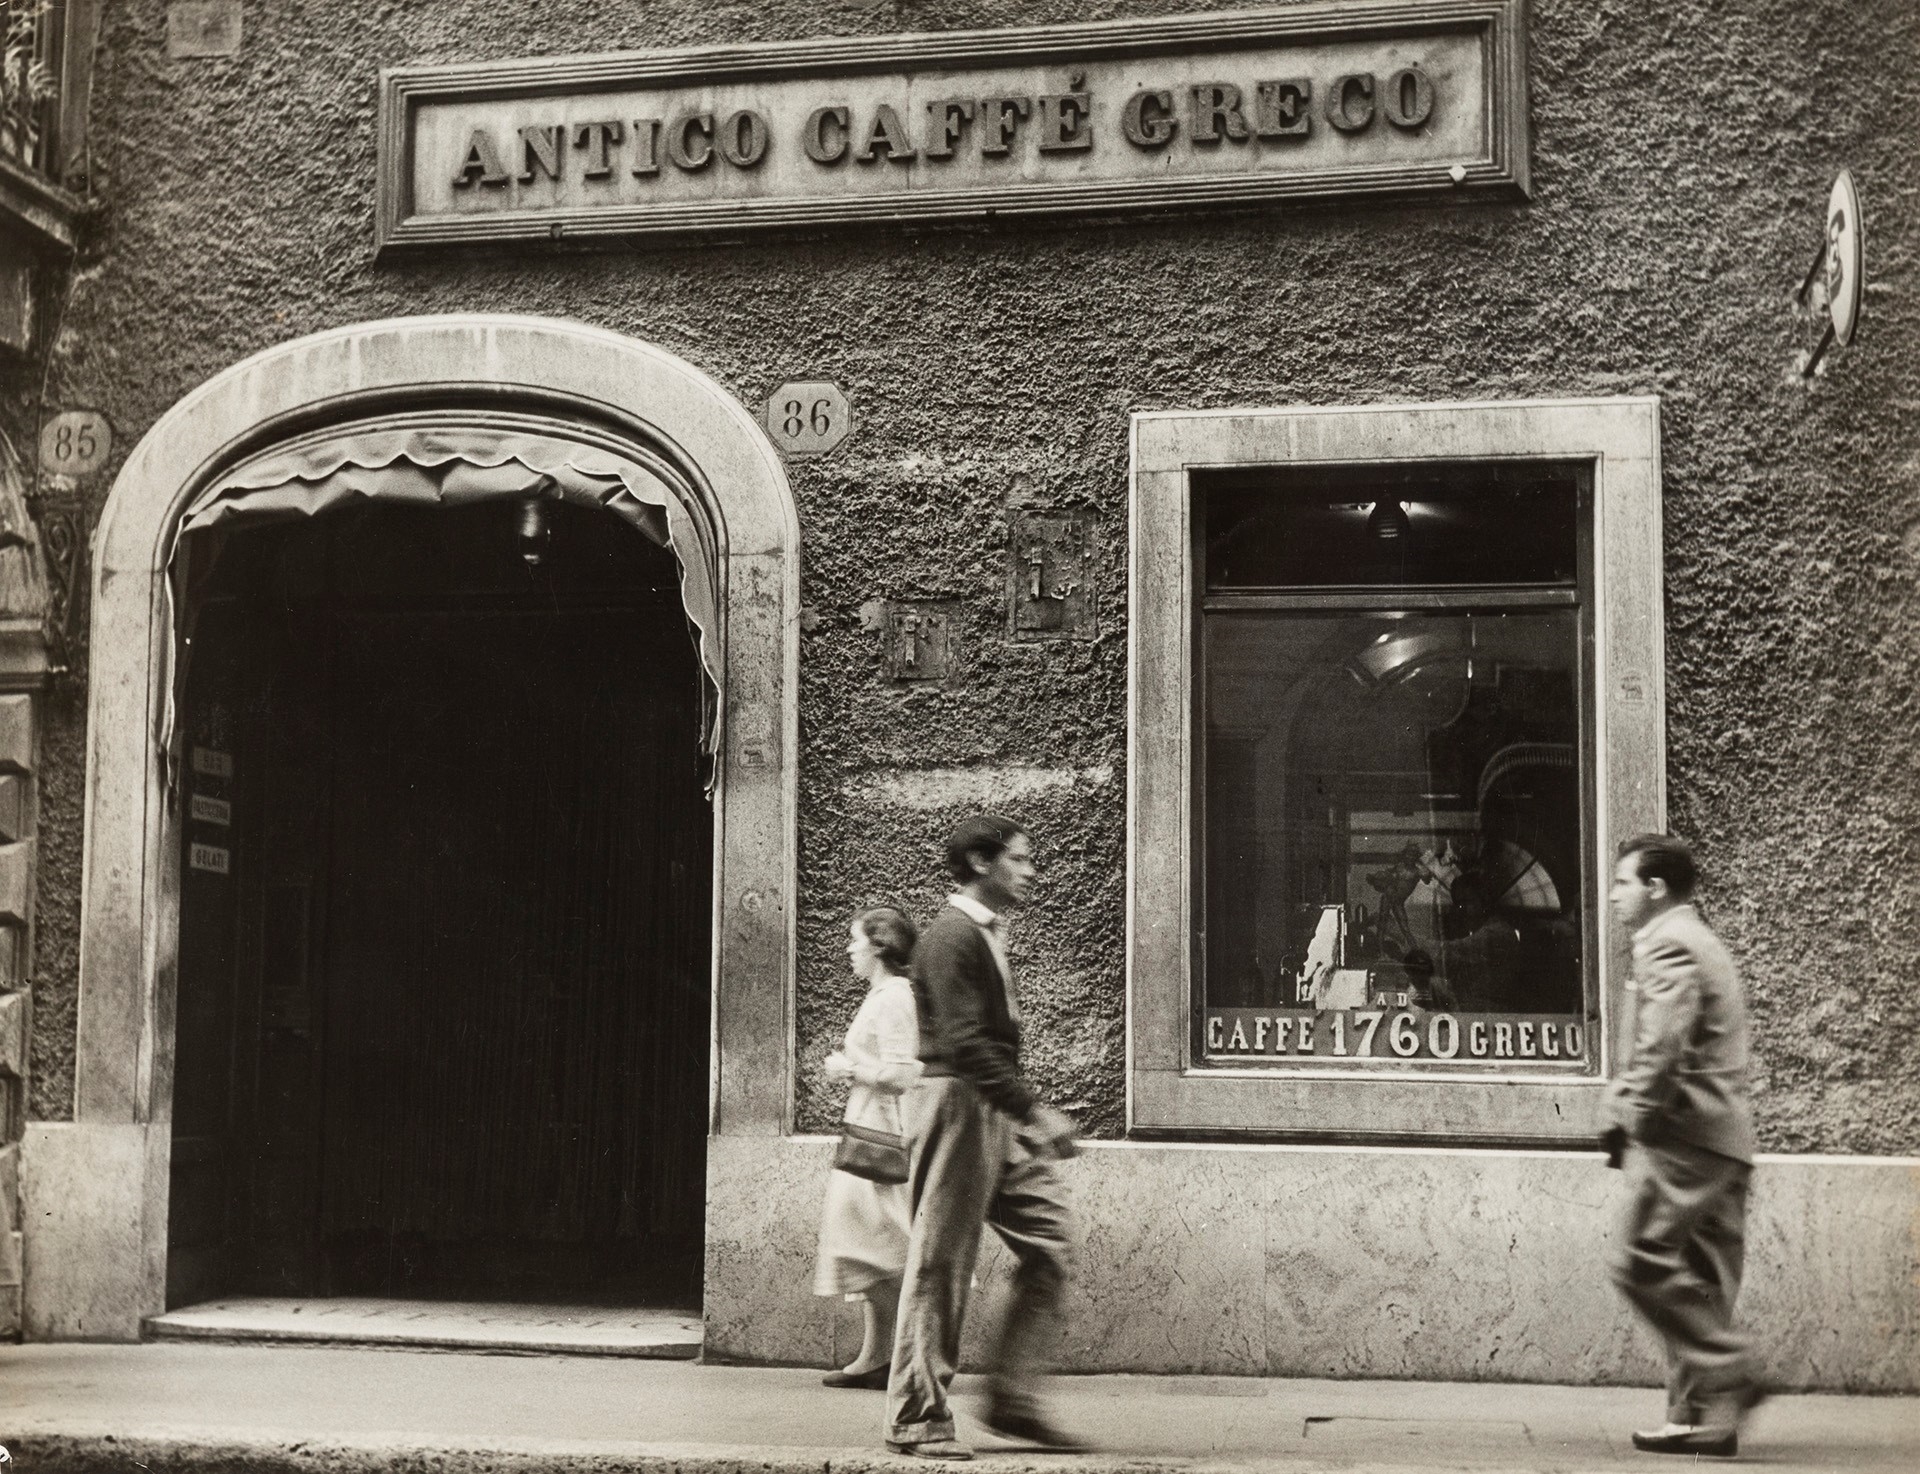 The first Gucci store in Rome 1928.